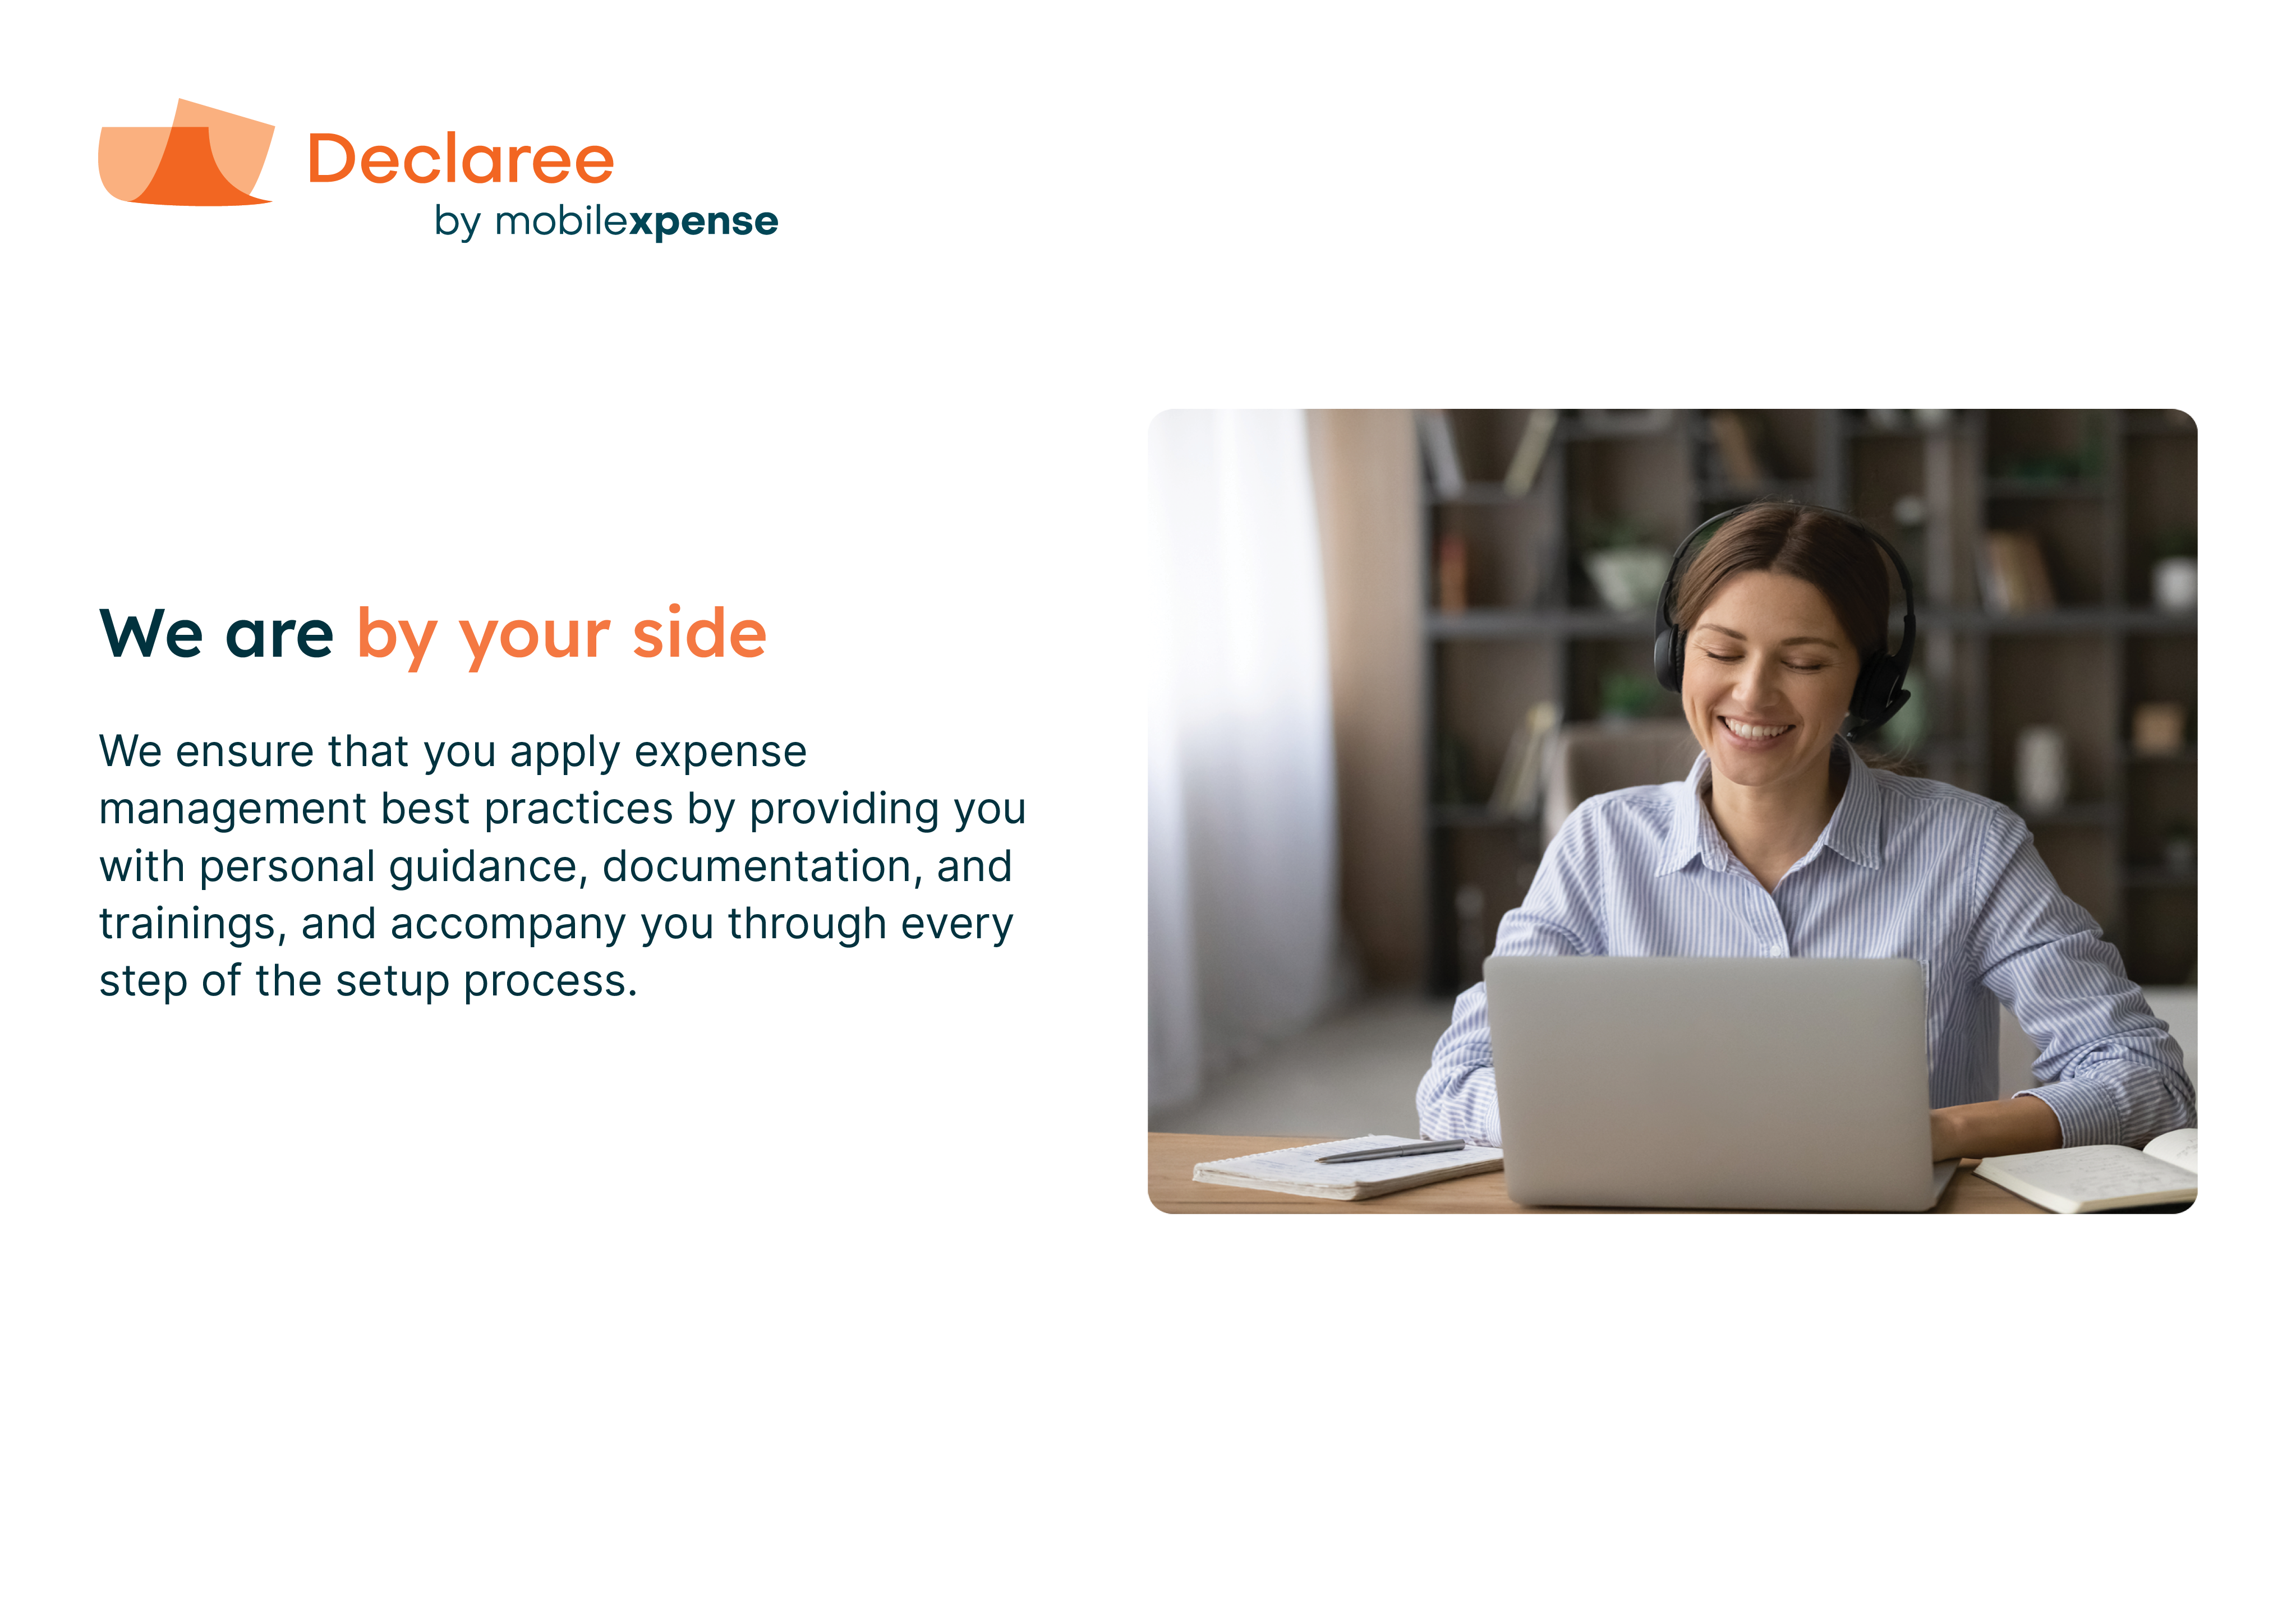 We ensure that you apply expense management best practices by providing you with personal guidance, documentation, and trainings, and accompany you through every step of the setup process.